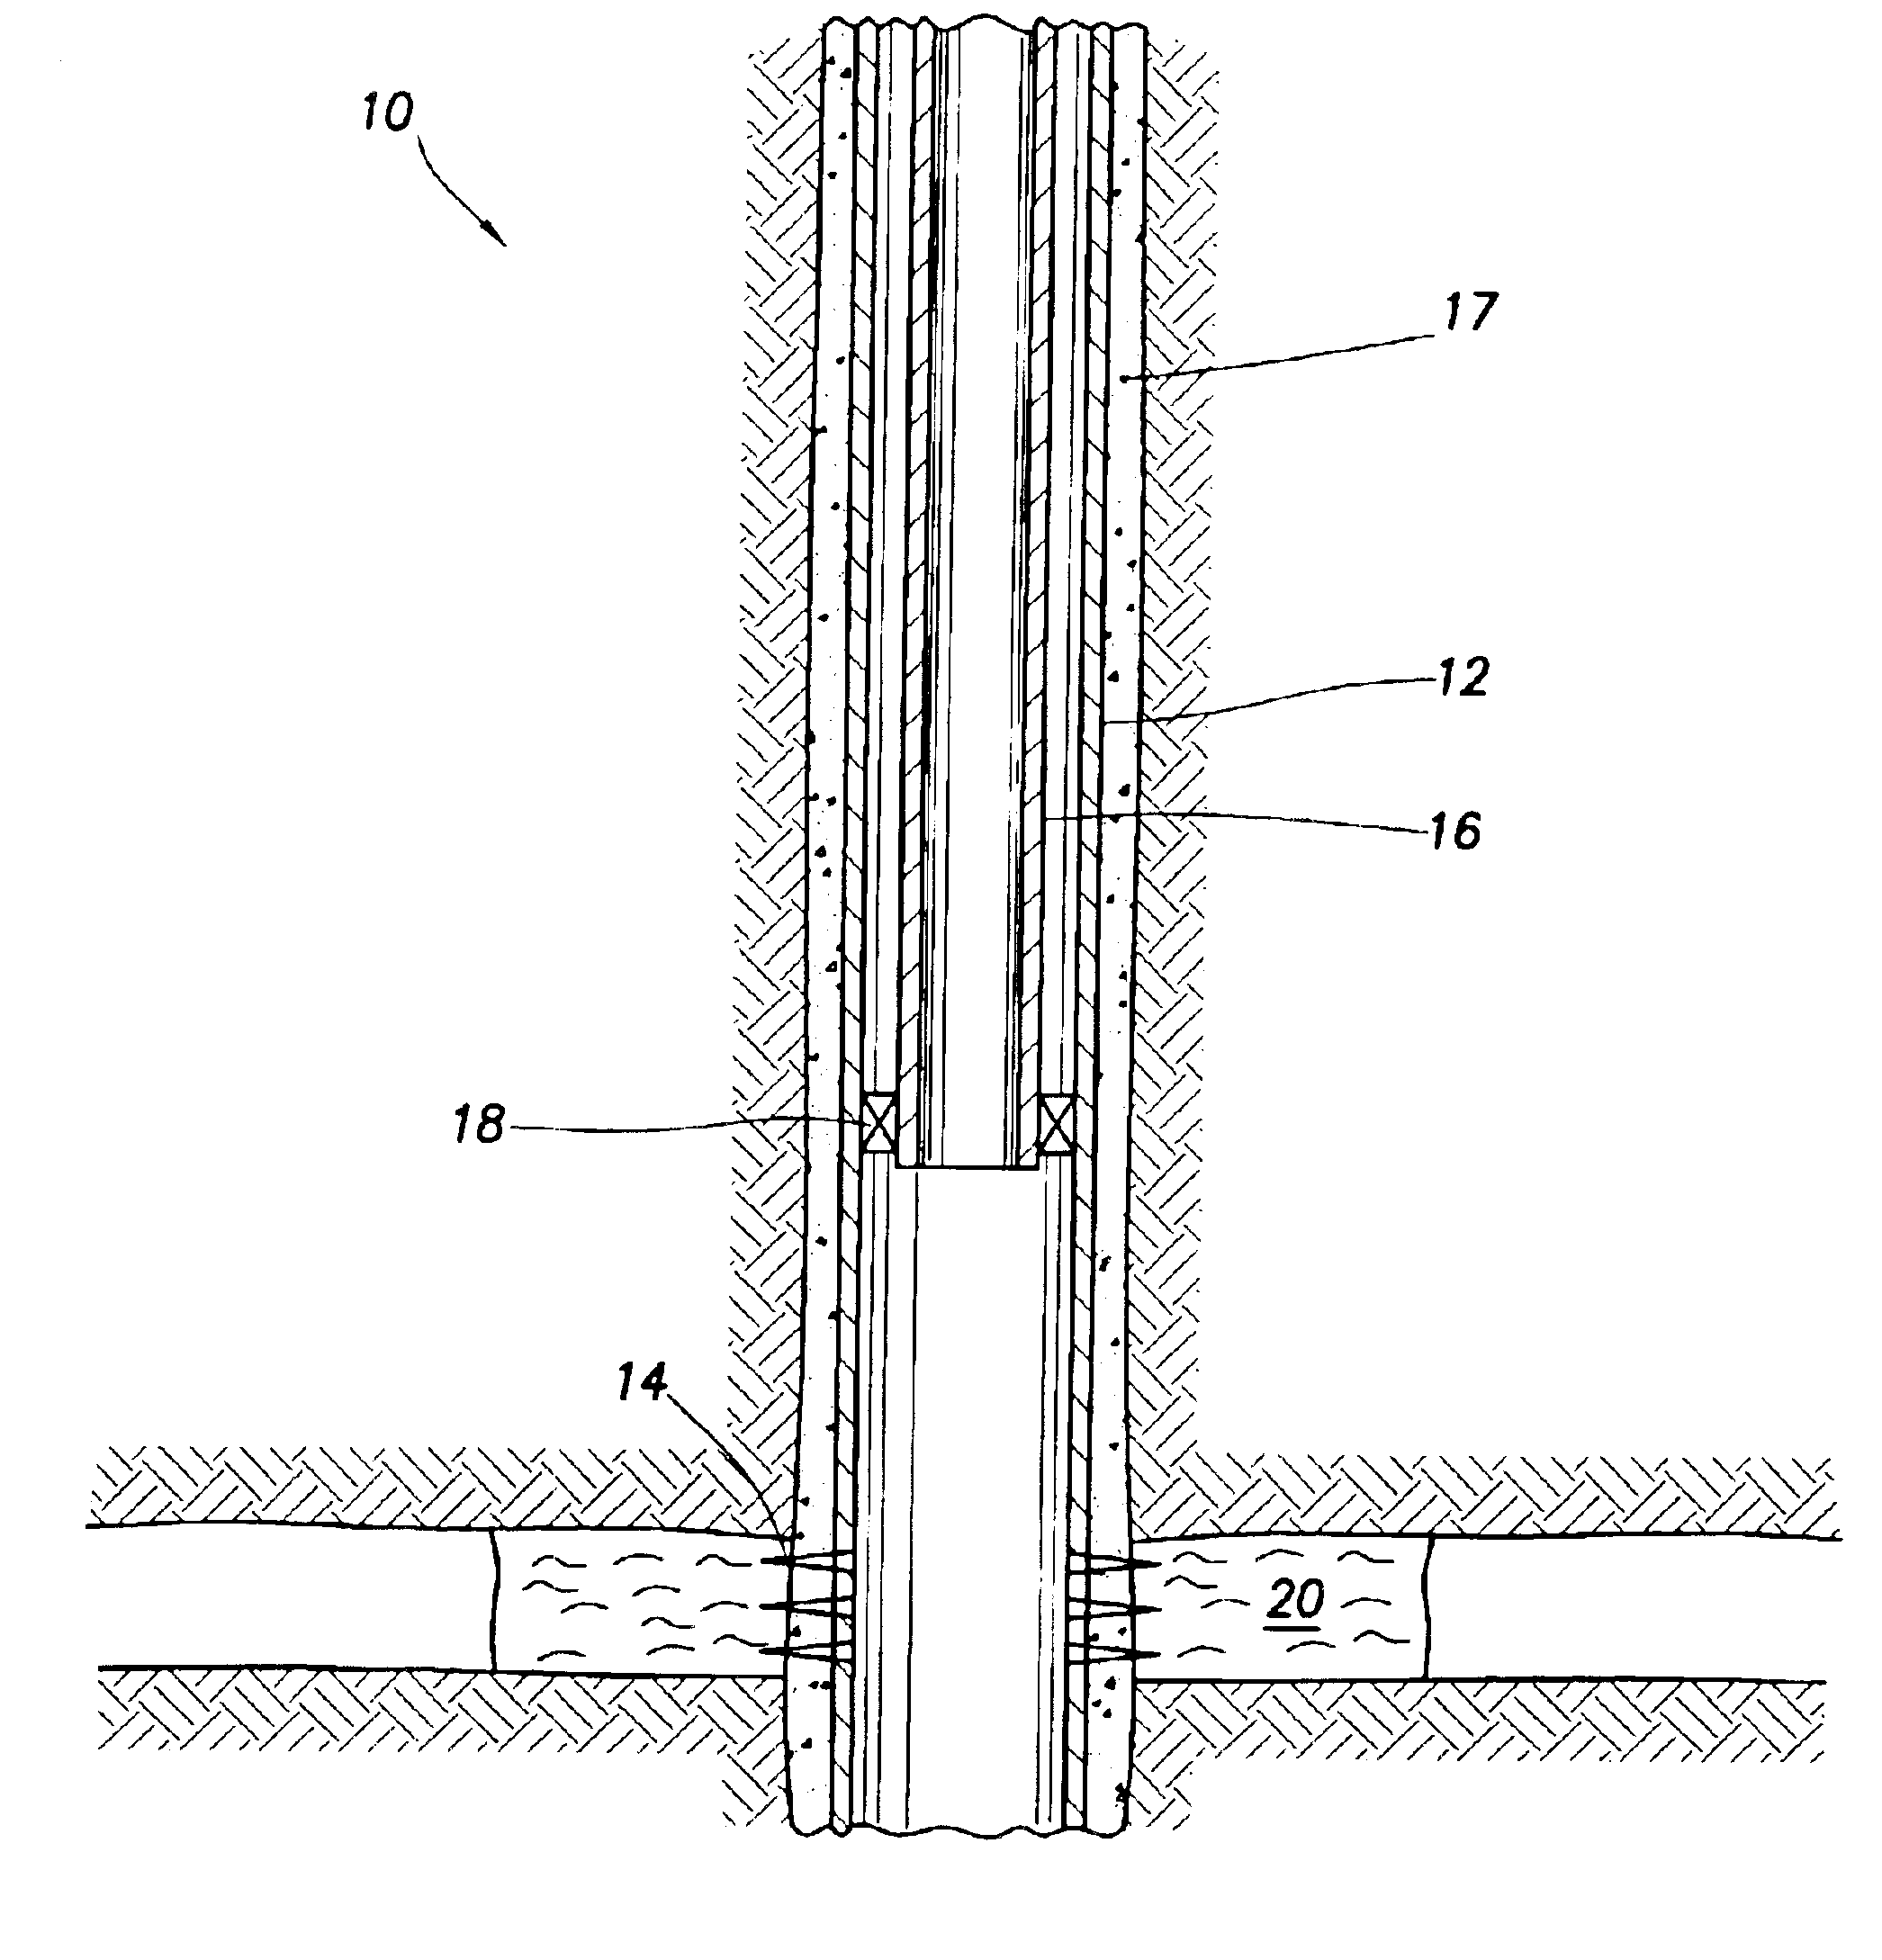 Method for reducing permeability restriction near wellbore